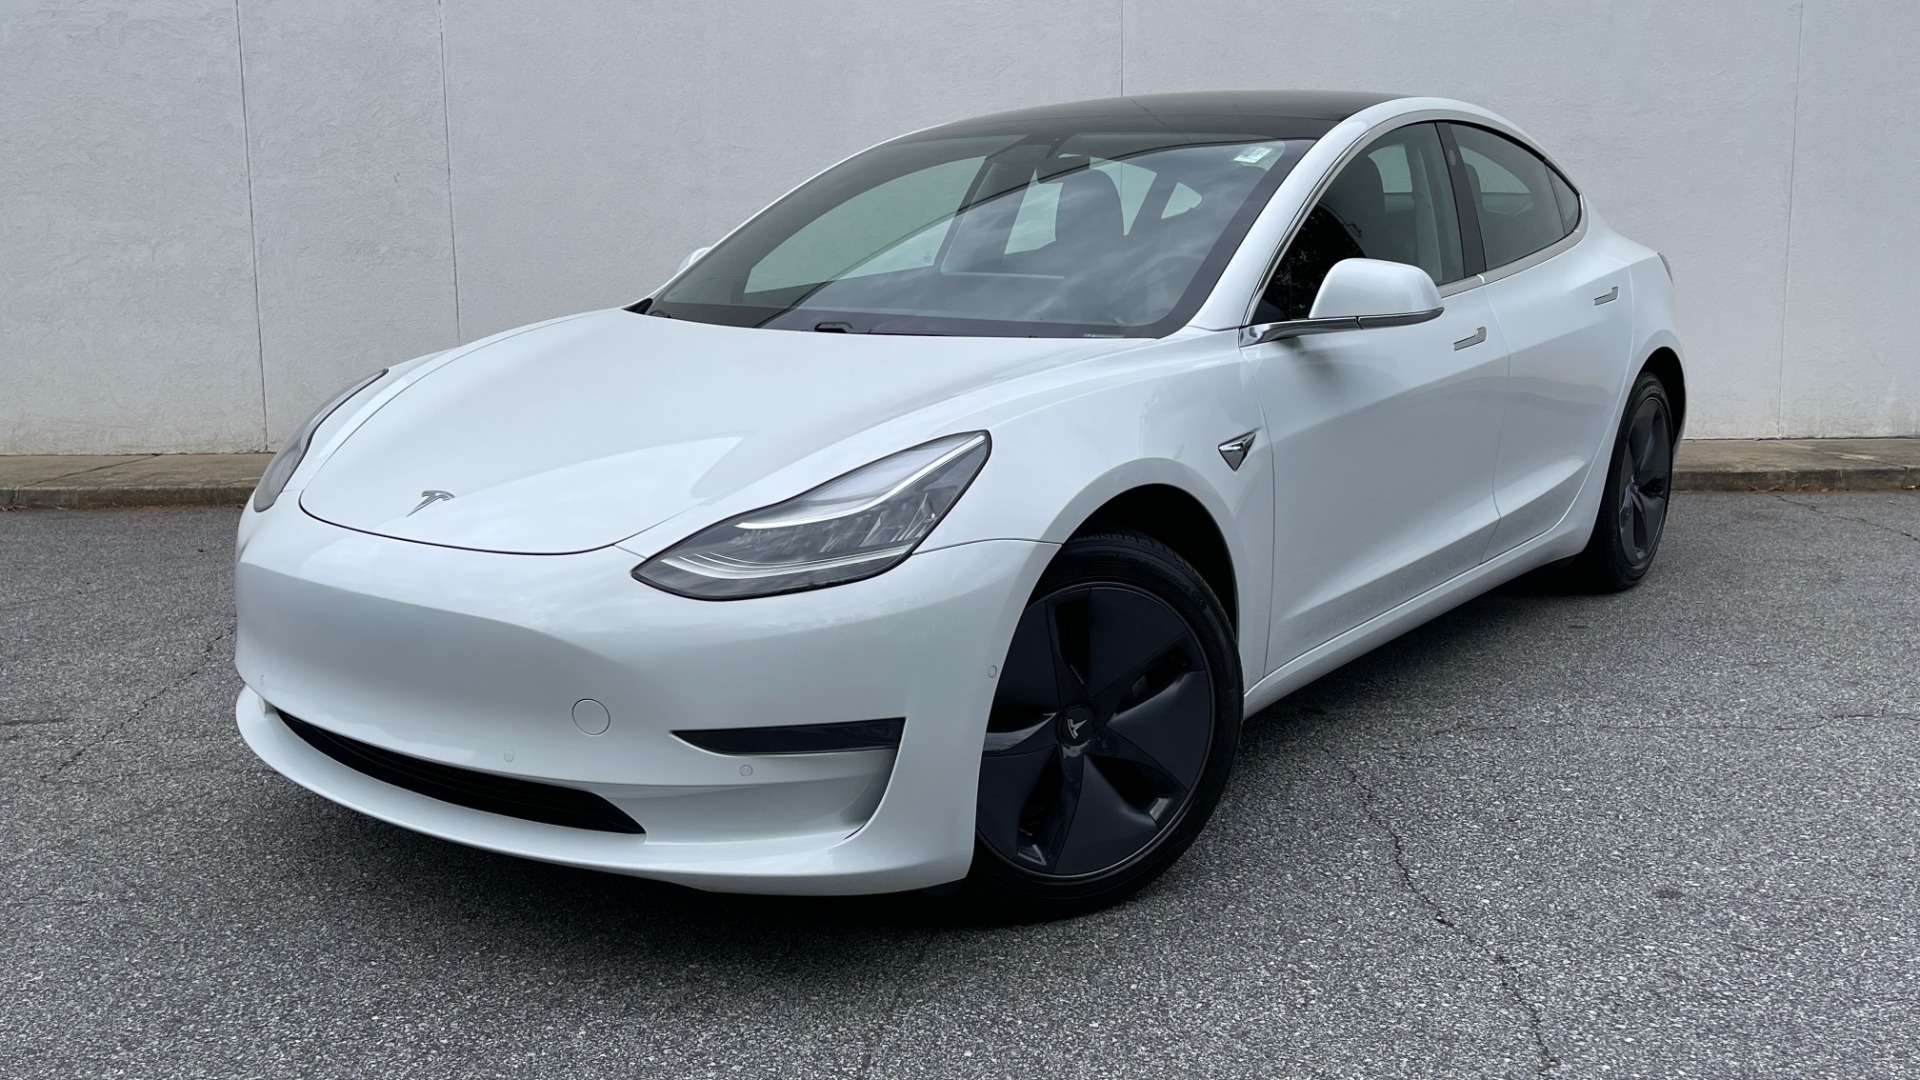 Used 2020 Tesla Model 3 STANDARD RANGE PLUS / AUTOPILOT / STANDARD CONNECTIVITY / PEARL WHITE for sale $49,595 at Formula Imports in Charlotte NC 28227 1